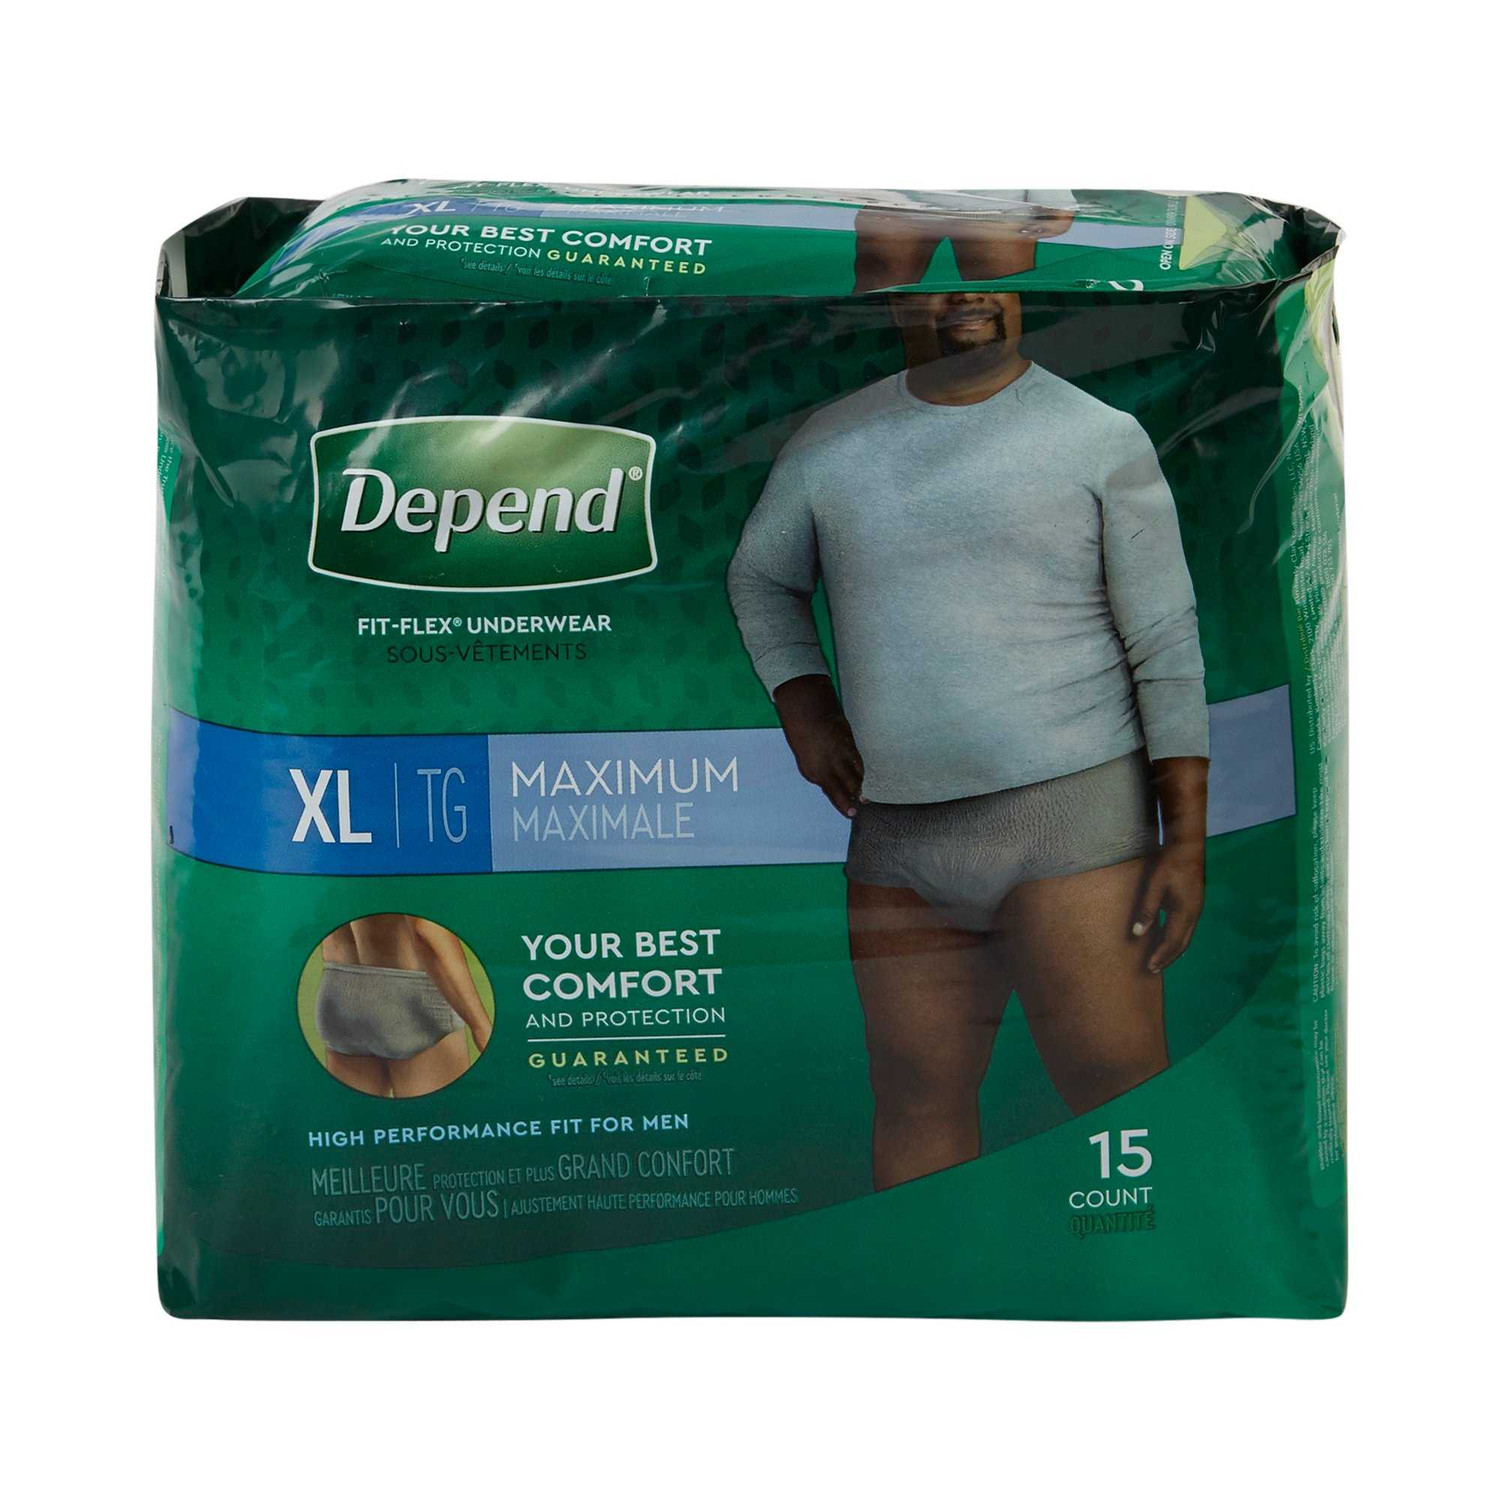 https://cdn11.bigcommerce.com/s-1l9d1d1d79/images/stencil/1500x1500/products/145062/293317/Adult-Absorbent-Underwear-Depend-FIT-FLEX-Pull-On-X-Large-Disposable-Heavy-Absorbency-47930-Case30-KIMBERLY-CLARK-PROFESSIONAL-1090313CS_160801__38507.1682593349.jpg?c=2&imbypass=on